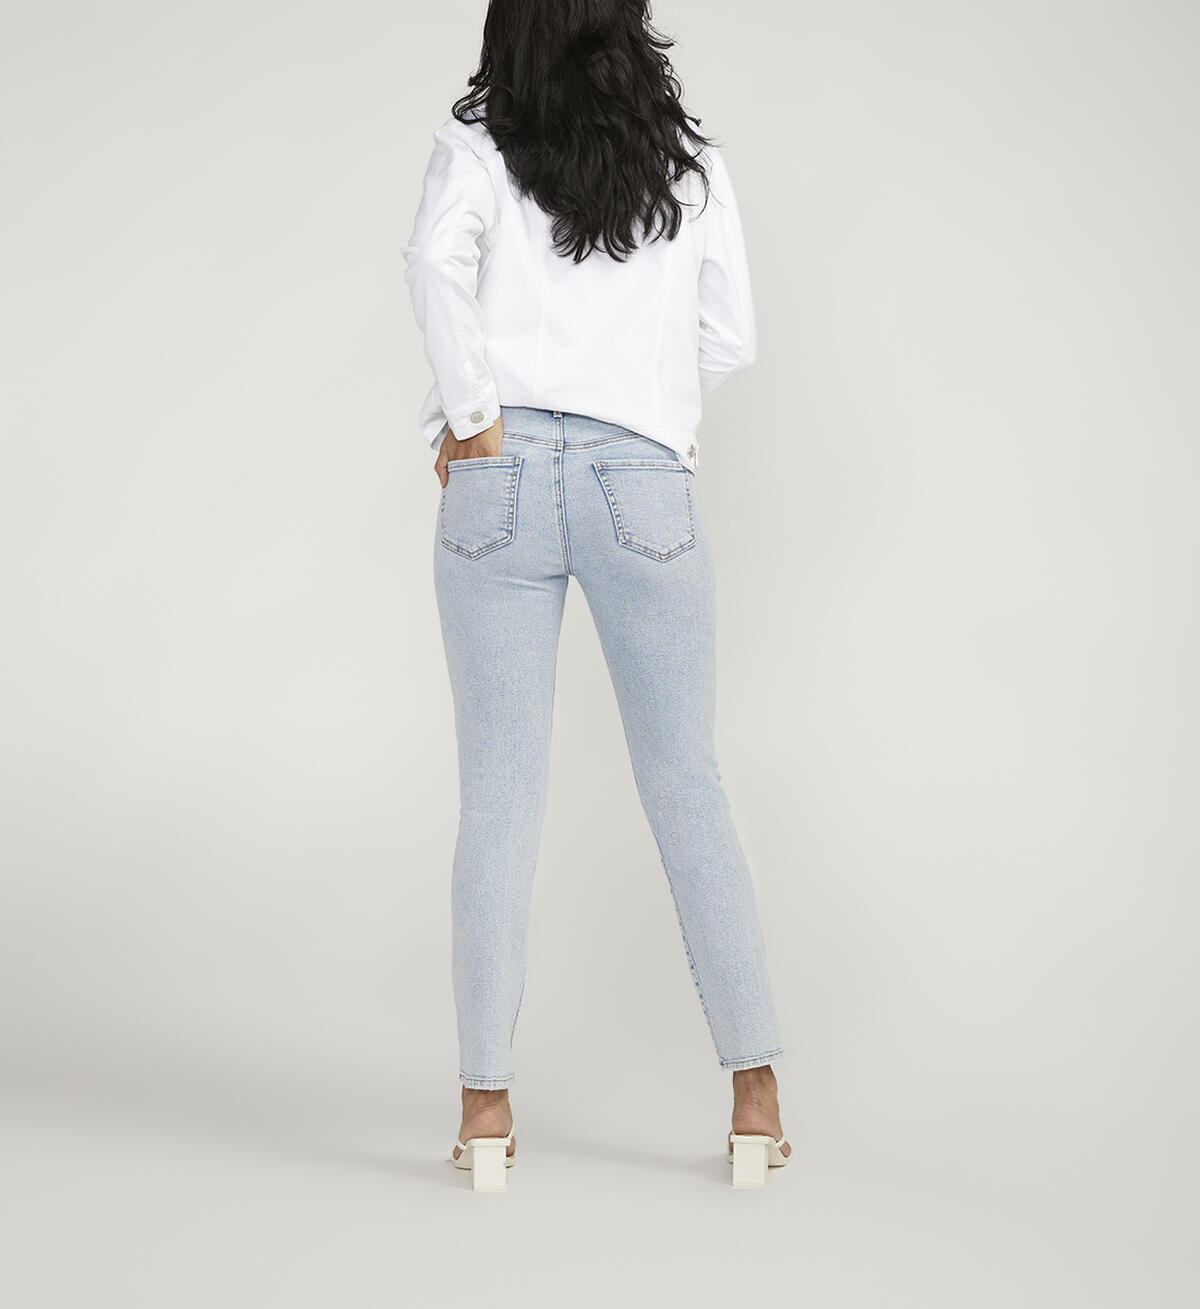 Cassie Mid Rise Straight Leg Jeans, Bali Blue, hi-res image number 1